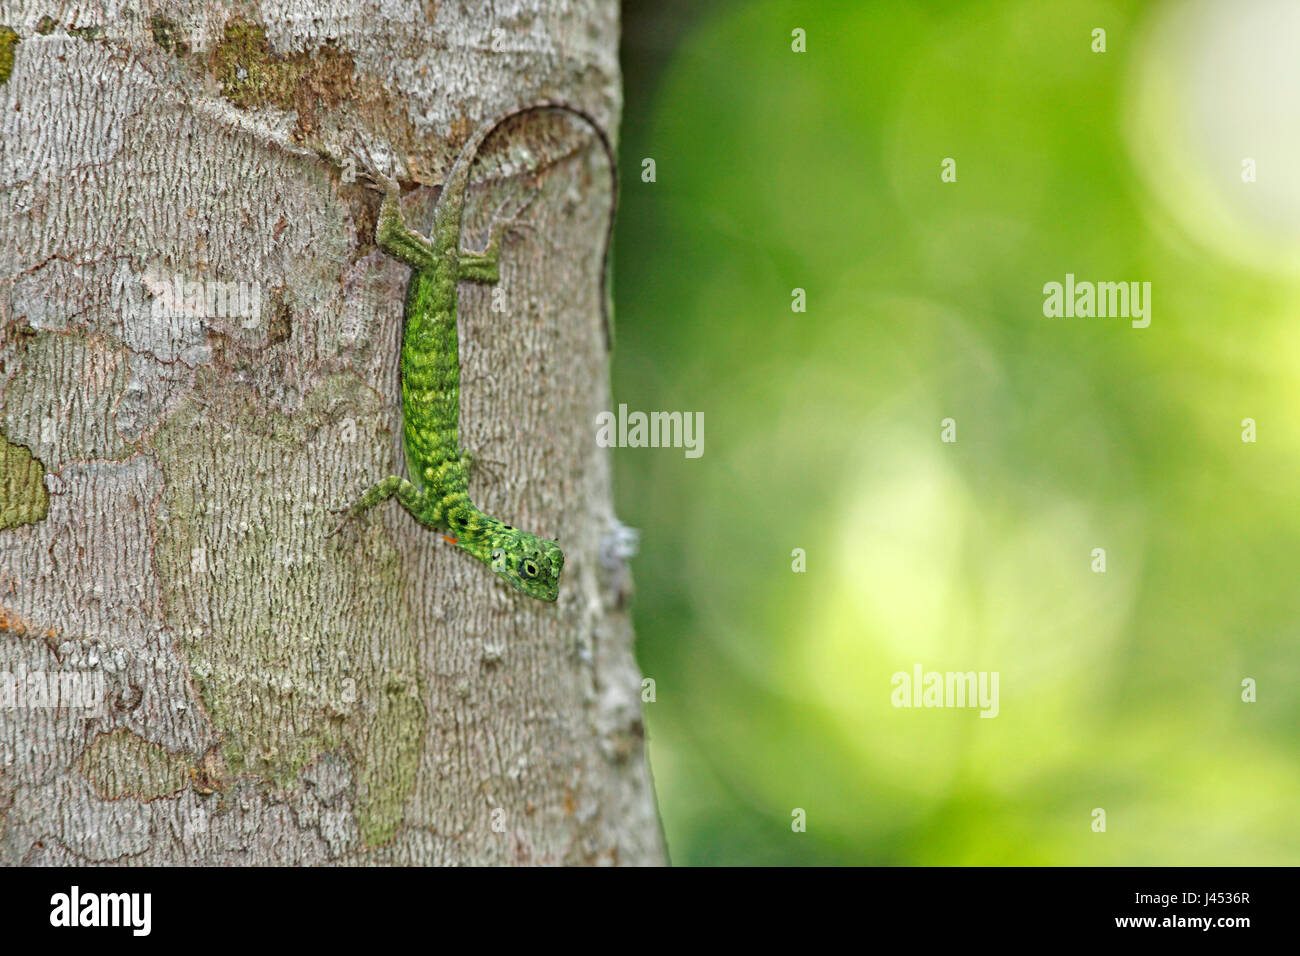 photo of a Horned flying lizard on a tree with a green background Stock Photo